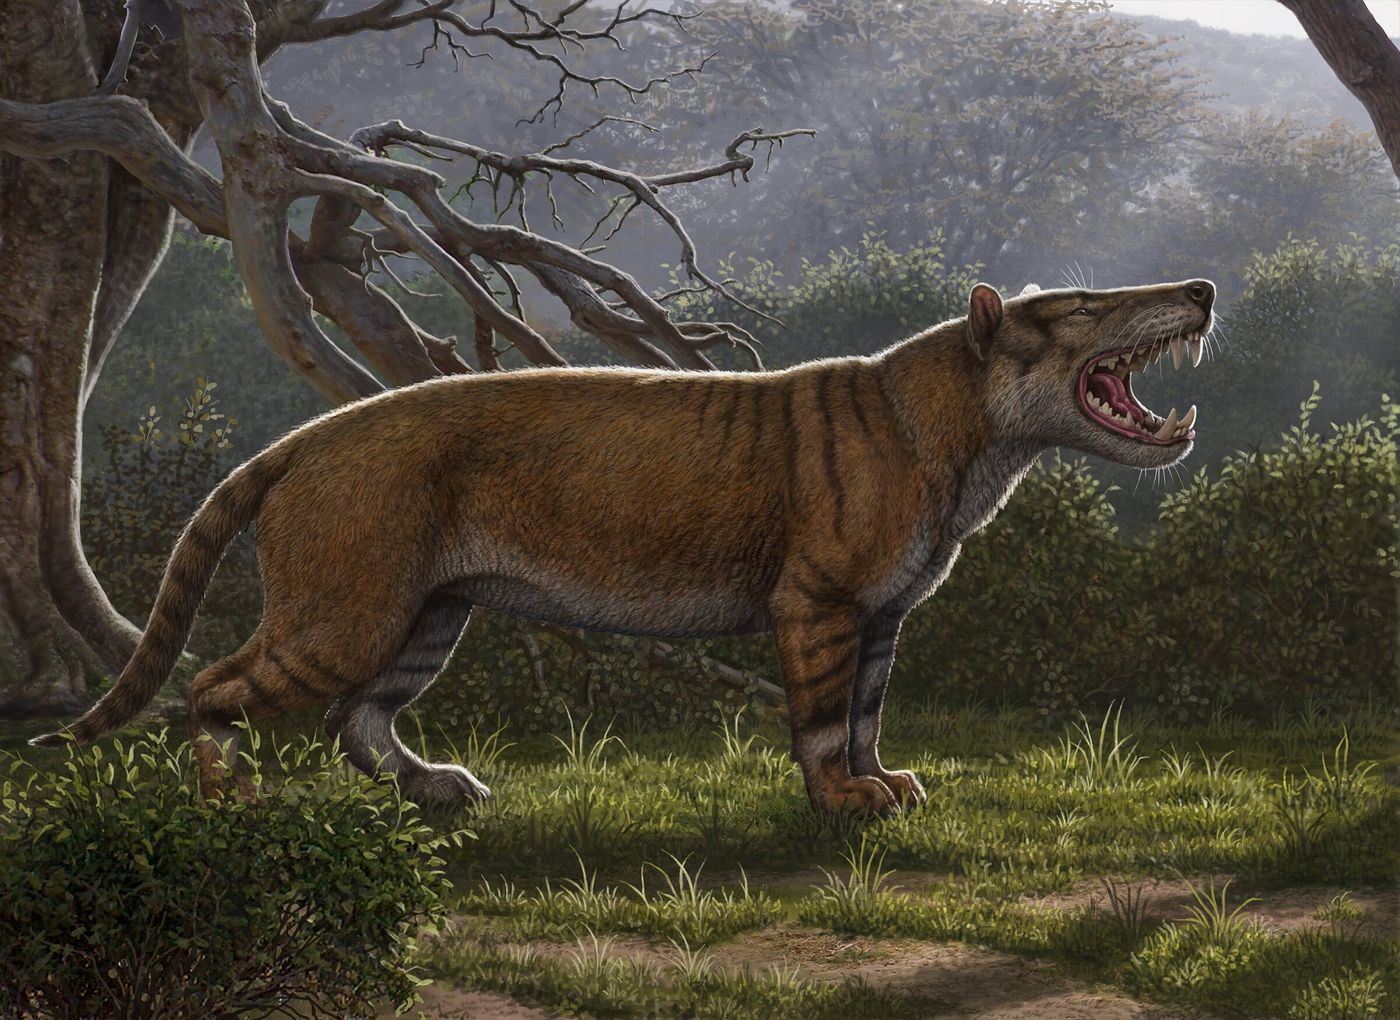 An artist's impression of the newly discovered beast.